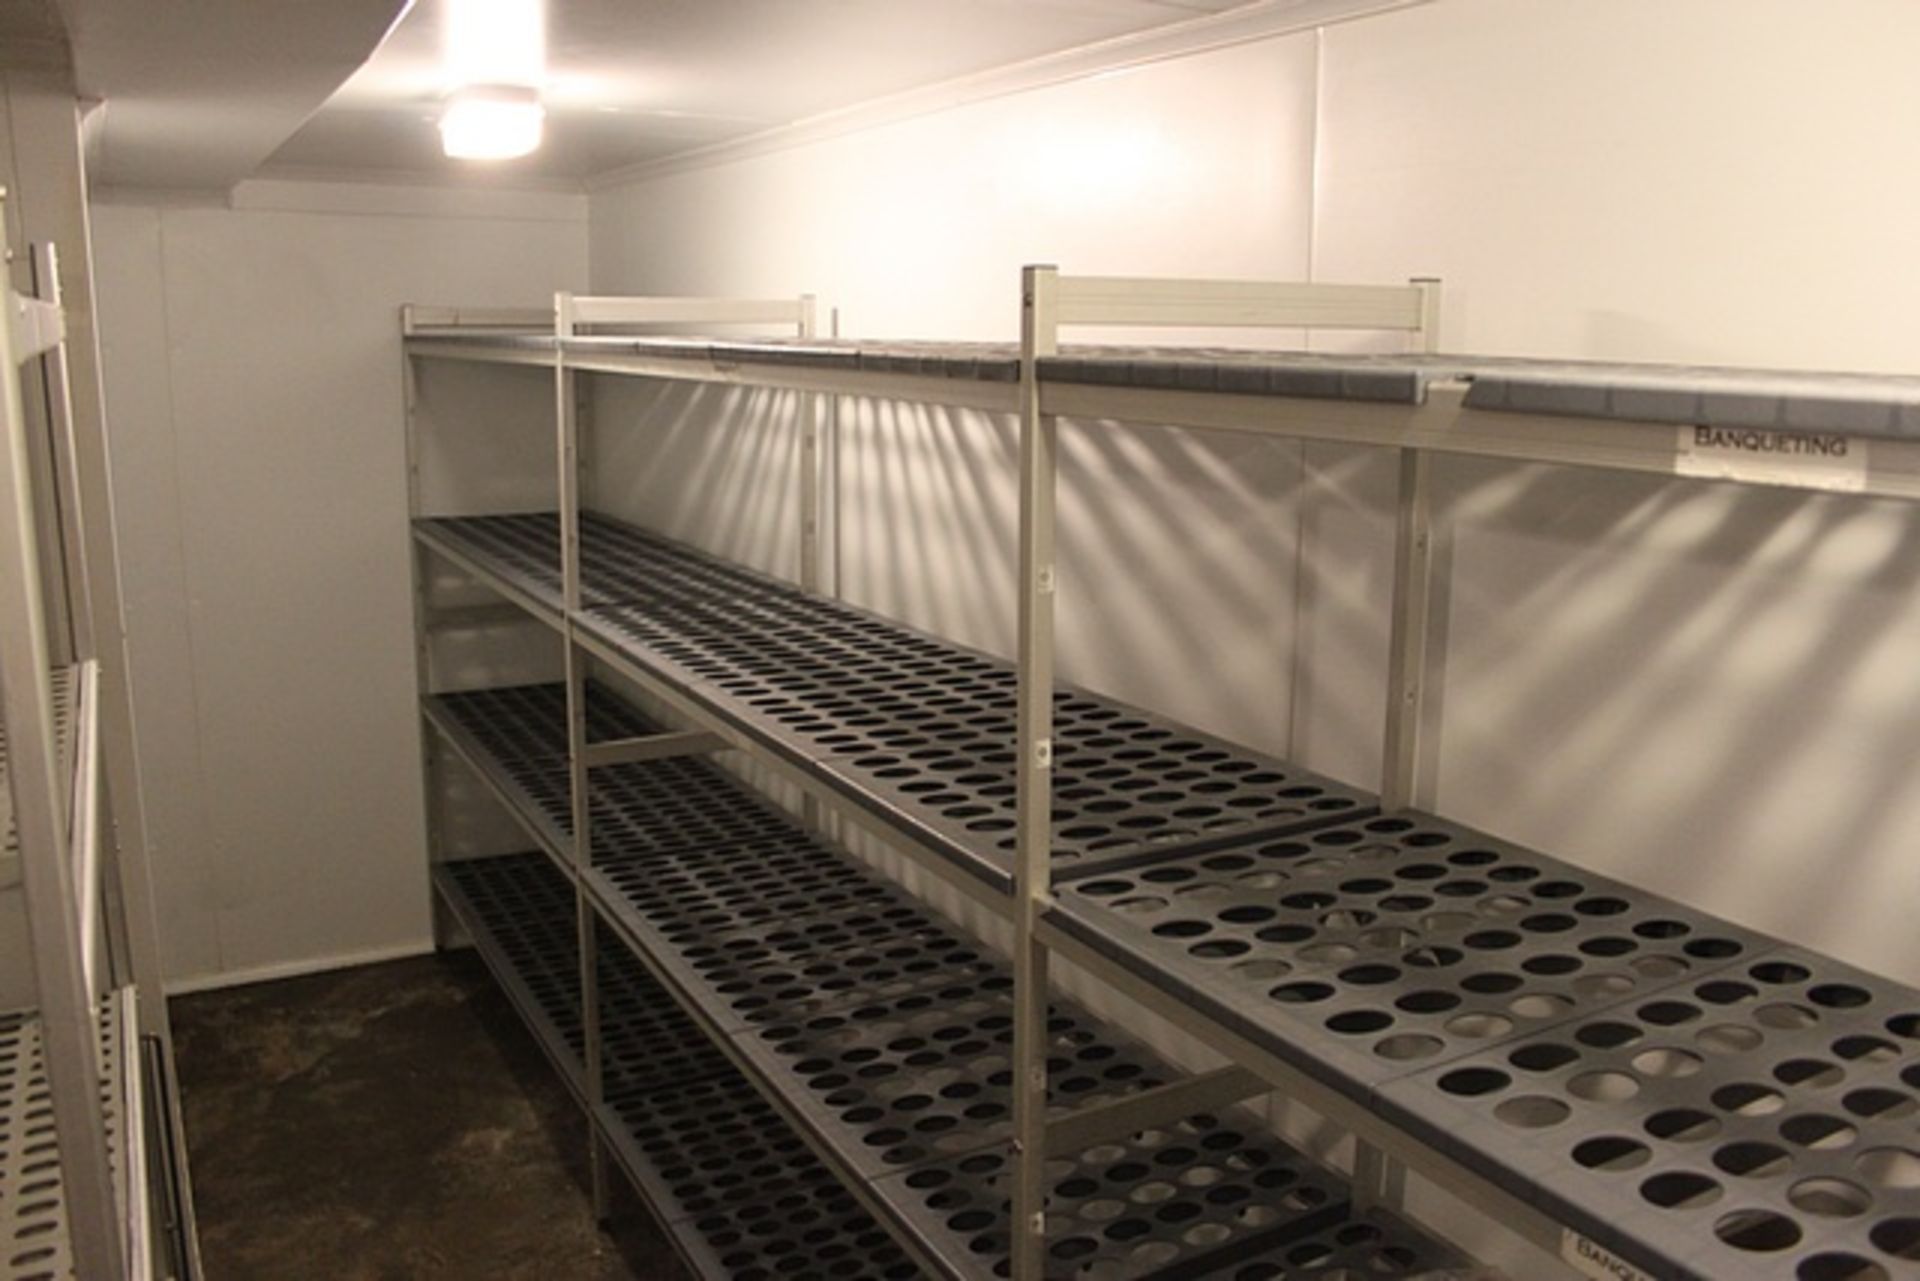 Dual walk in cold room and freezer 2100mm x 1600mm x 1900mm / 4000mm x 4000mm x 1900mm - Image 5 of 8